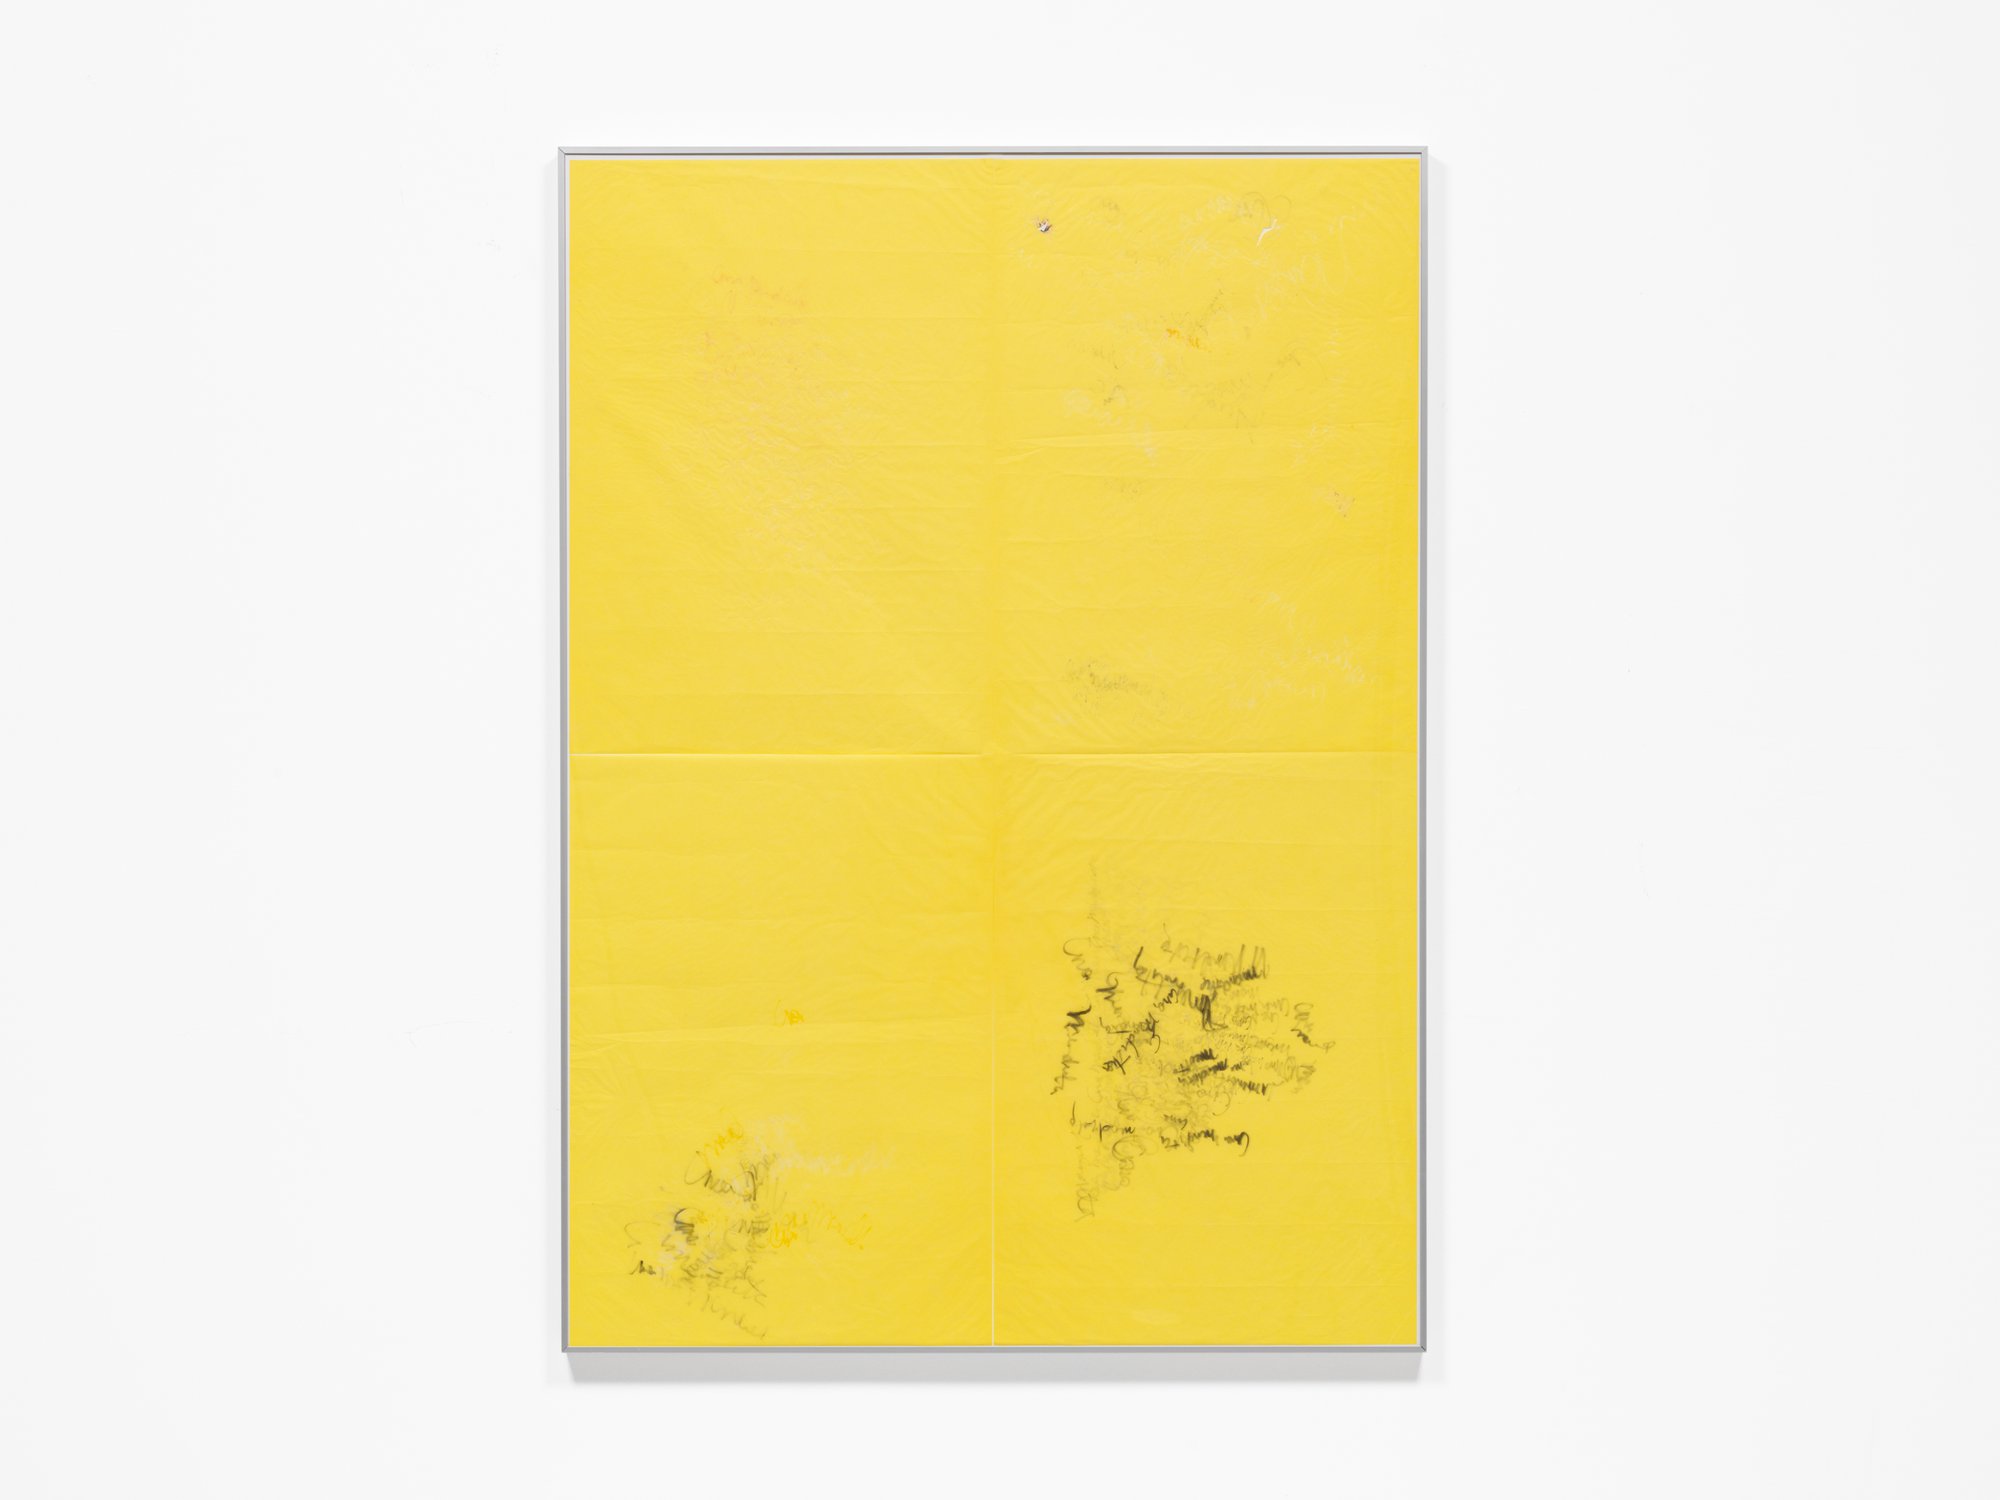 Iris Touliatou, song (yellow), attempts to forge Ana Mendieta’s signature, various media, 150 x 100 cm (59 1/8 x 39 3/8 in), 2007 - ongoing.